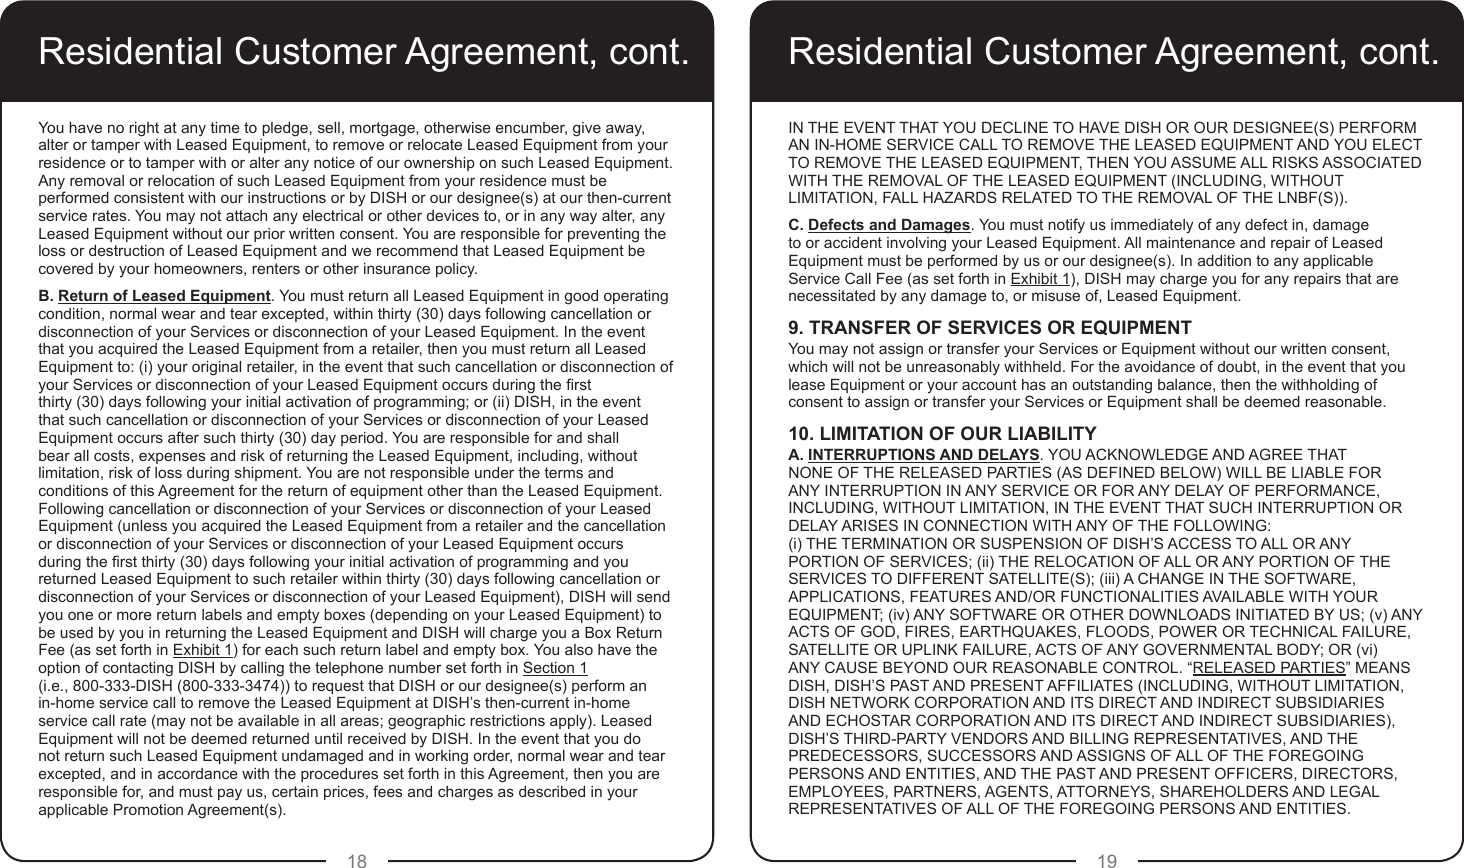 18 19Residential Customer Agreement, cont.You have no right at any time to pledge, sell, mortgage, otherwise encumber, give away, alter or tamper with Leased Equipment, to remove or relocate Leased Equipment from your residence or to tamper with or alter any notice of our ownership on such Leased Equipment.  Any removal or relocation of such Leased Equipment from your residence must be performed consistent with our instructions or by DISH or our designee(s) at our then-current service rates. You may not attach any electrical or other devices to, or in any way alter, any Leased Equipment without our prior written consent. You are responsible for preventing the loss or destruction of Leased Equipment and we recommend that Leased Equipment be covered by your homeowners, renters or other insurance policy.B. Return of Leased Equipment. You must return all Leased Equipment in good operating condition, normal wear and tear excepted, within thirty (30) days following cancellation or disconnection of your Services or disconnection of your Leased Equipment. In the event that you acquired the Leased Equipment from a retailer, then you must return all Leased Equipment to: (i) your original retailer, in the event that such cancellation or disconnection of your Services or disconnection of your Leased Equipment occurs during the rst  thirty (30) days following your initial activation of programming; or (ii) DISH, in the event that such cancellation or disconnection of your Services or disconnection of your Leased Equipment occurs after such thirty (30) day period. You are responsible for and shall bear all costs, expenses and risk of returning the Leased Equipment, including, without limitation, risk of loss during shipment. You are not responsible under the terms and conditions of this Agreement for the return of equipment other than the Leased Equipment. Following cancellation or disconnection of your Services or disconnection of your Leased Equipment (unless you acquired the Leased Equipment from a retailer and the cancellation or disconnection of your Services or disconnection of your Leased Equipment occurs during the rst thirty (30) days following your initial activation of programming and you returned Leased Equipment to such retailer within thirty (30) days following cancellation or disconnection of your Services or disconnection of your Leased Equipment), DISH will send you one or more return labels and empty boxes (depending on your Leased Equipment) to be used by you in returning the Leased Equipment and DISH will charge you a Box Return Fee (as set forth in Exhibit 1) for each such return label and empty box. You also have the option of contacting DISH by calling the telephone number set forth in Section 1  (i.e., 800-333-DISH (800-333-3474)) to request that DISH or our designee(s) perform an in-home service call to remove the Leased Equipment at DISH’s then-current in-home service call rate (may not be available in all areas; geographic restrictions apply). Leased Equipment will not be deemed returned until received by DISH. In the event that you do not return such Leased Equipment undamaged and in working order, normal wear and tear excepted, and in accordance with the procedures set forth in this Agreement, then you are responsible for, and must pay us, certain prices, fees and charges as described in your applicable Promotion Agreement(s). Residential Customer Agreement, cont.IN THE EVENT THAT YOU DECLINE TO HAVE DISH OR OUR DESIGNEE(S) PERFORM AN IN-HOME SERVICE CALL TO REMOVE THE LEASED EQUIPMENT AND YOU ELECT TO REMOVE THE LEASED EQUIPMENT, THEN YOU ASSUME ALL RISKS ASSOCIATED WITH THE REMOVAL OF THE LEASED EQUIPMENT (INCLUDING, WITHOUT LIMITATION, FALL HAZARDS RELATED TO THE REMOVAL OF THE LNBF(S)).C. Defects and Damages. You must notify us immediately of any defect in, damage to or accident involving your Leased Equipment. All maintenance and repair of Leased Equipment must be performed by us or our designee(s). In addition to any applicable Service Call Fee (as set forth in Exhibit 1), DISH may charge you for any repairs that are necessitated by any damage to, or misuse of, Leased Equipment.9. TRANSFER OF SERVICES OR EQUIPMENTYou may not assign or transfer your Services or Equipment without our written consent, which will not be unreasonably withheld. For the avoidance of doubt, in the event that you lease Equipment or your account has an outstanding balance, then the withholding of consent to assign or transfer your Services or Equipment shall be deemed reasonable. 10. LIMITATION OF OUR LIABILITYA. INTERRUPTIONS AND DELAYS. YOU ACKNOWLEDGE AND AGREE THAT NONE OF THE RELEASED PARTIES (AS DEFINED BELOW) WILL BE LIABLE FOR ANY INTERRUPTION IN ANY SERVICE OR FOR ANY DELAY OF PERFORMANCE, INCLUDING, WITHOUT LIMITATION, IN THE EVENT THAT SUCH INTERRUPTION OR DELAY ARISES IN CONNECTION WITH ANY OF THE FOLLOWING:  (i) THE TERMINATION OR SUSPENSION OF DISH’S ACCESS TO ALL OR ANY PORTION OF SERVICES; (ii) THE RELOCATION OF ALL OR ANY PORTION OF THE SERVICES TO DIFFERENT SATELLITE(S); (iii) A CHANGE IN THE SOFTWARE, APPLICATIONS, FEATURES AND/OR FUNCTIONALITIES AVAILABLE WITH YOUR EQUIPMENT; (iv) ANY SOFTWARE OR OTHER DOWNLOADS INITIATED BY US; (v) ANY ACTS OF GOD, FIRES, EARTHQUAKES, FLOODS, POWER OR TECHNICAL FAILURE, SATELLITE OR UPLINK FAILURE, ACTS OF ANY GOVERNMENTAL BODY; OR (vi) ANY CAUSE BEYOND OUR REASONABLE CONTROL. “RELEASED PARTIES” MEANS DISH, DISH’S PAST AND PRESENT AFFILIATES (INCLUDING, WITHOUT LIMITATION, DISH NETWORK CORPORATION AND ITS DIRECT AND INDIRECT SUBSIDIARIES AND ECHOSTAR CORPORATION AND ITS DIRECT AND INDIRECT SUBSIDIARIES), DISH’S THIRD-PARTY VENDORS AND BILLING REPRESENTATIVES, AND THE PREDECESSORS, SUCCESSORS AND ASSIGNS OF ALL OF THE FOREGOING PERSONS AND ENTITIES, AND THE PAST AND PRESENT OFFICERS, DIRECTORS, EMPLOYEES, PARTNERS, AGENTS, ATTORNEYS, SHAREHOLDERS AND LEGAL REPRESENTATIVES OF ALL OF THE FOREGOING PERSONS AND ENTITIES.